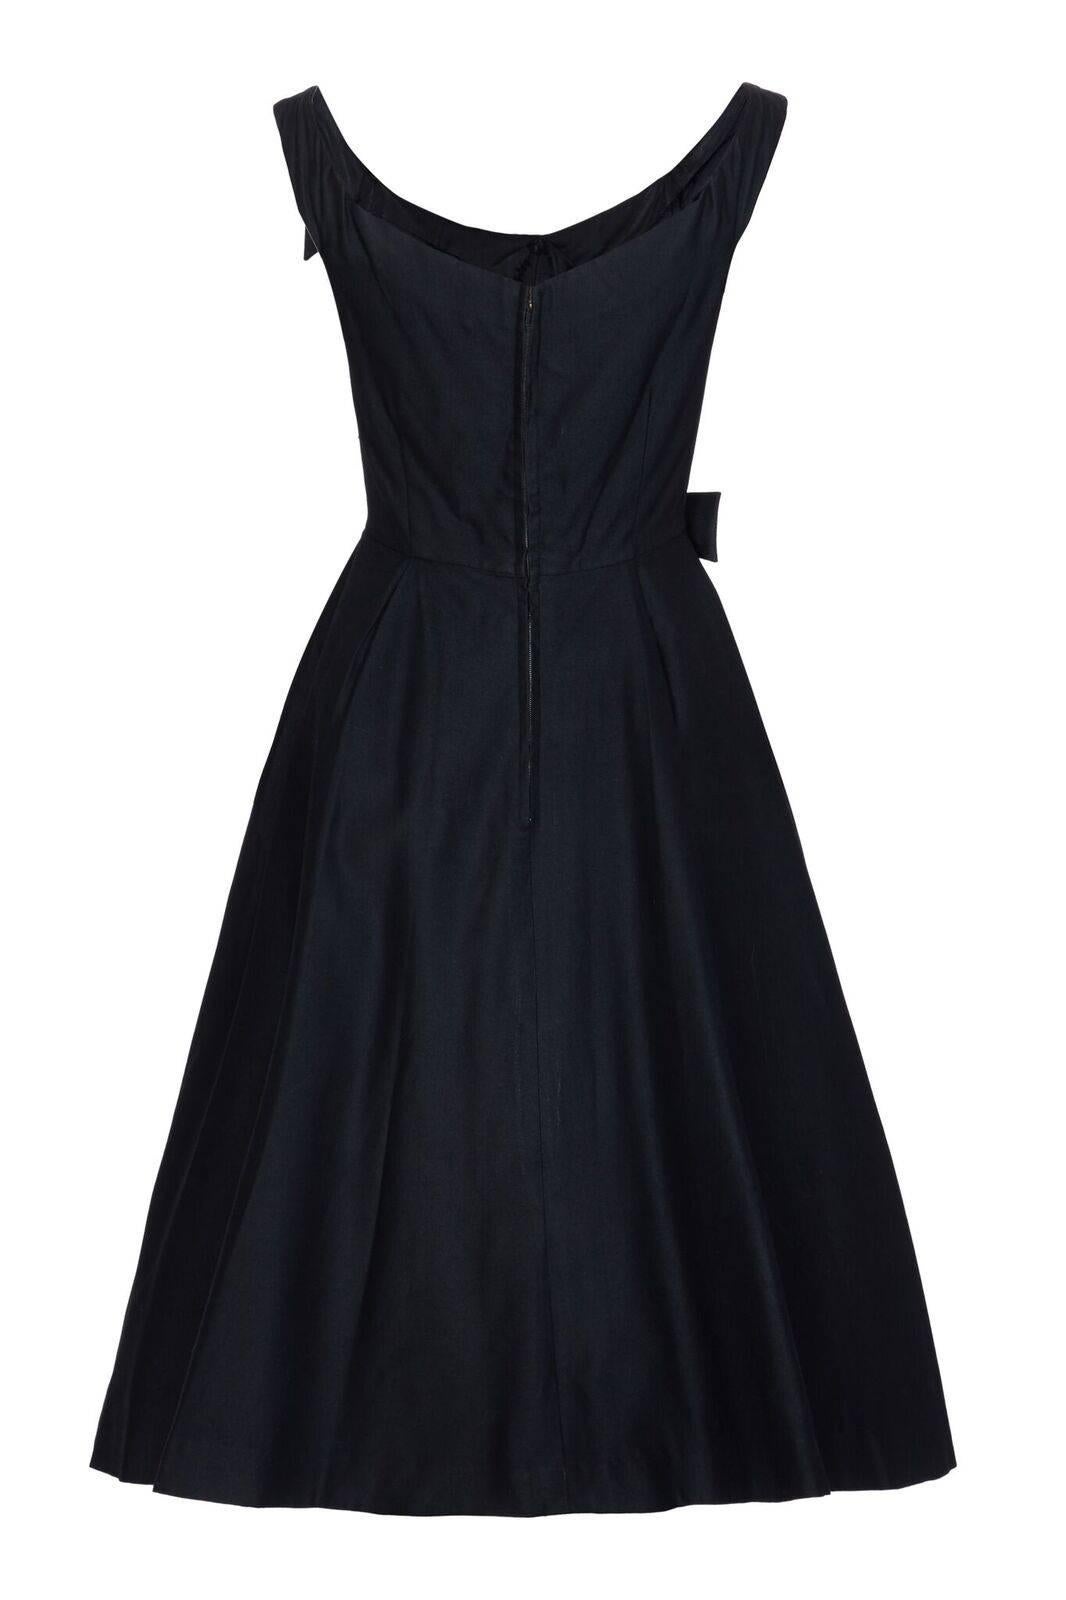 This striking 1950s New-Look style evening gown by Jacques Heim demonstrates some impeccable tailoring skills. The dress is of heavy starched black cotton and styled to flatter a classic hourglass silhouette. The wide angled straps graduate